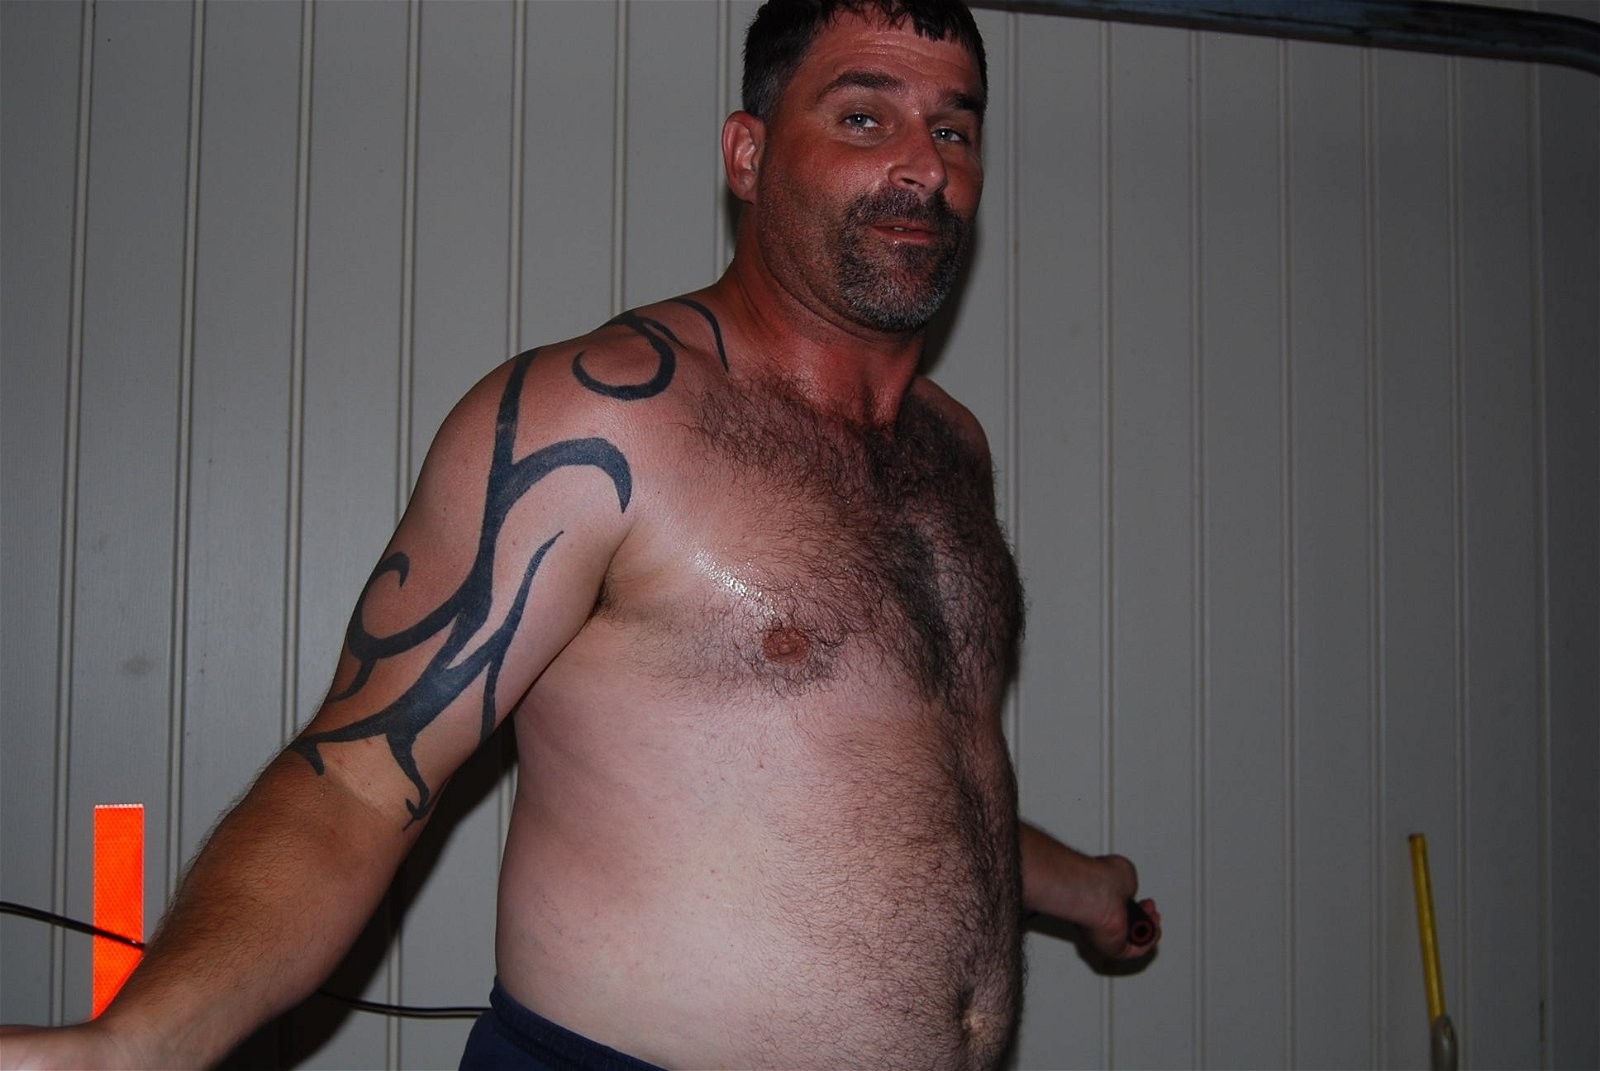 Watch the Photo by Hairy Musclebears with the username @hairymusclebears, posted on September 24, 2019. The post is about the topic GayTumblr. and the text says 'hairychest Manly Macho Man from USAFUR.com galleries  #gaybody #gaygames #gayguys #gaymale #gayhunk #hairybelly #BearPhotoADay #gaychubby #gay #bearweek365  #pop #papi #grandpa #grandfather #silverdaddy #silverfox #hairybelly #chub #chubby #husband..'